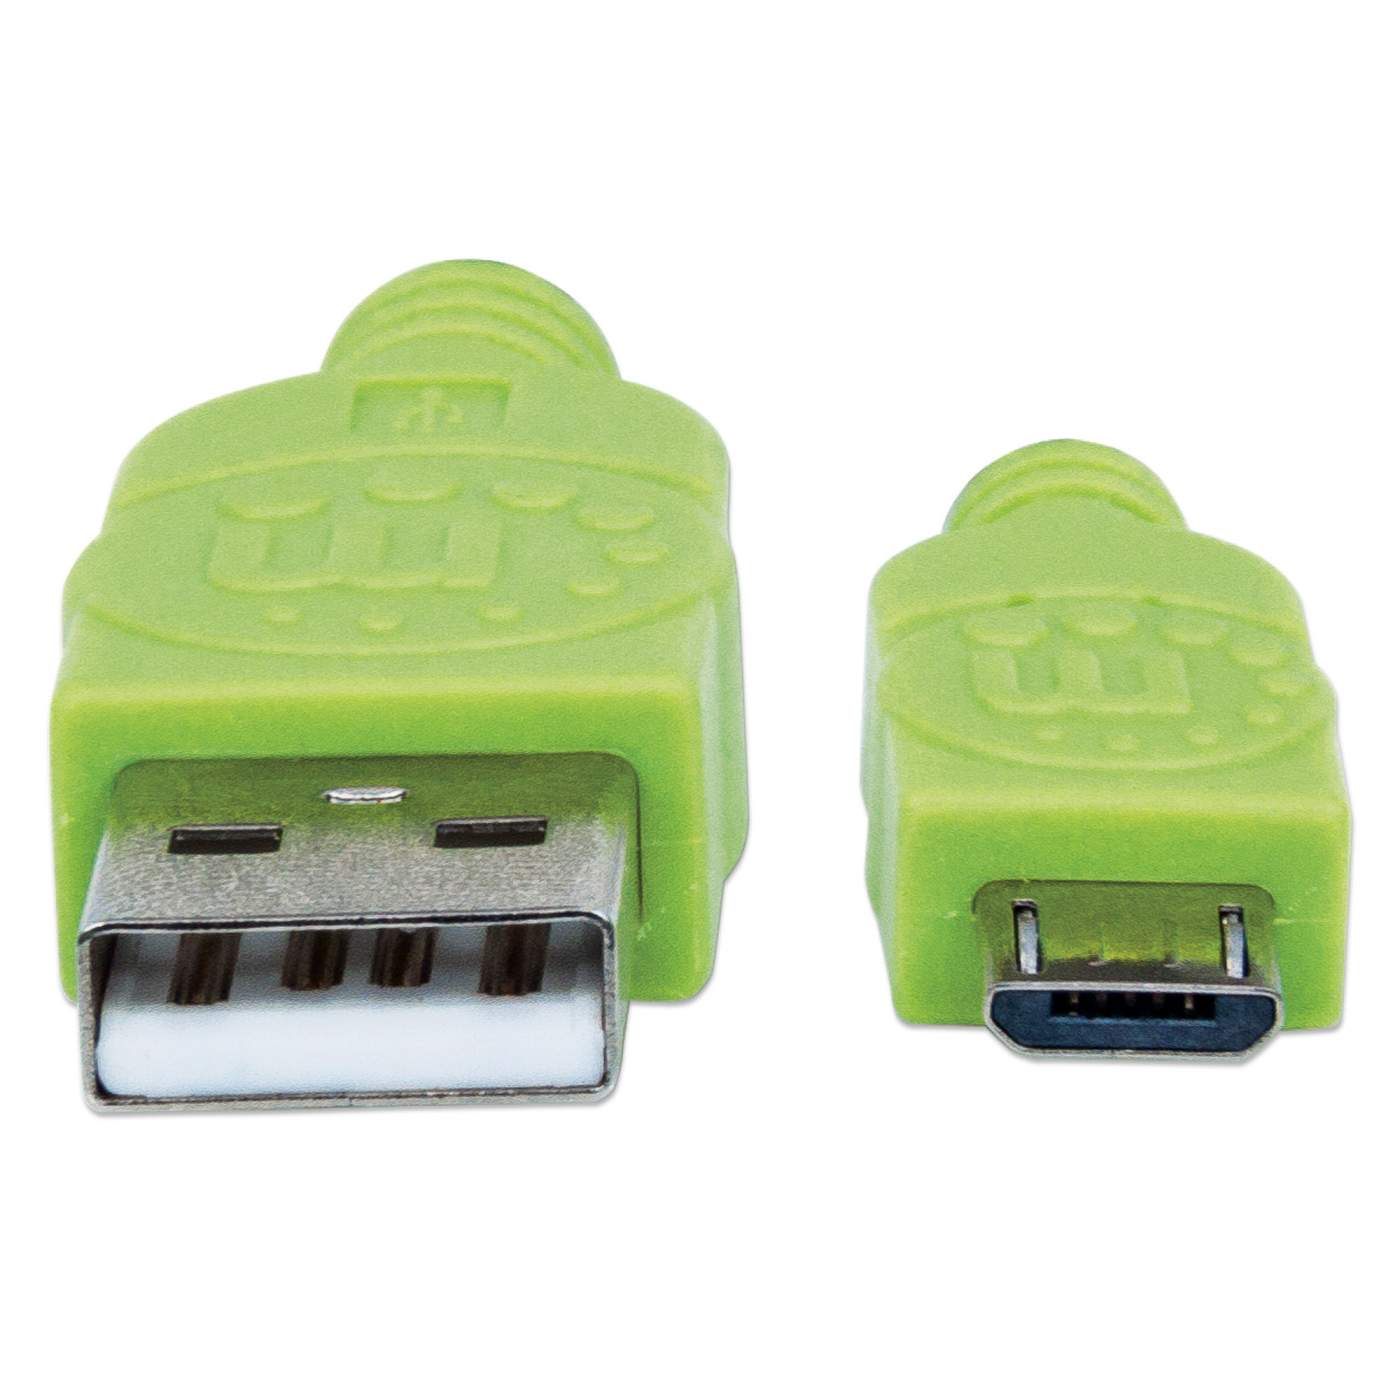 Braided Hi-Speed USB Micro-B Device Cable Image 4